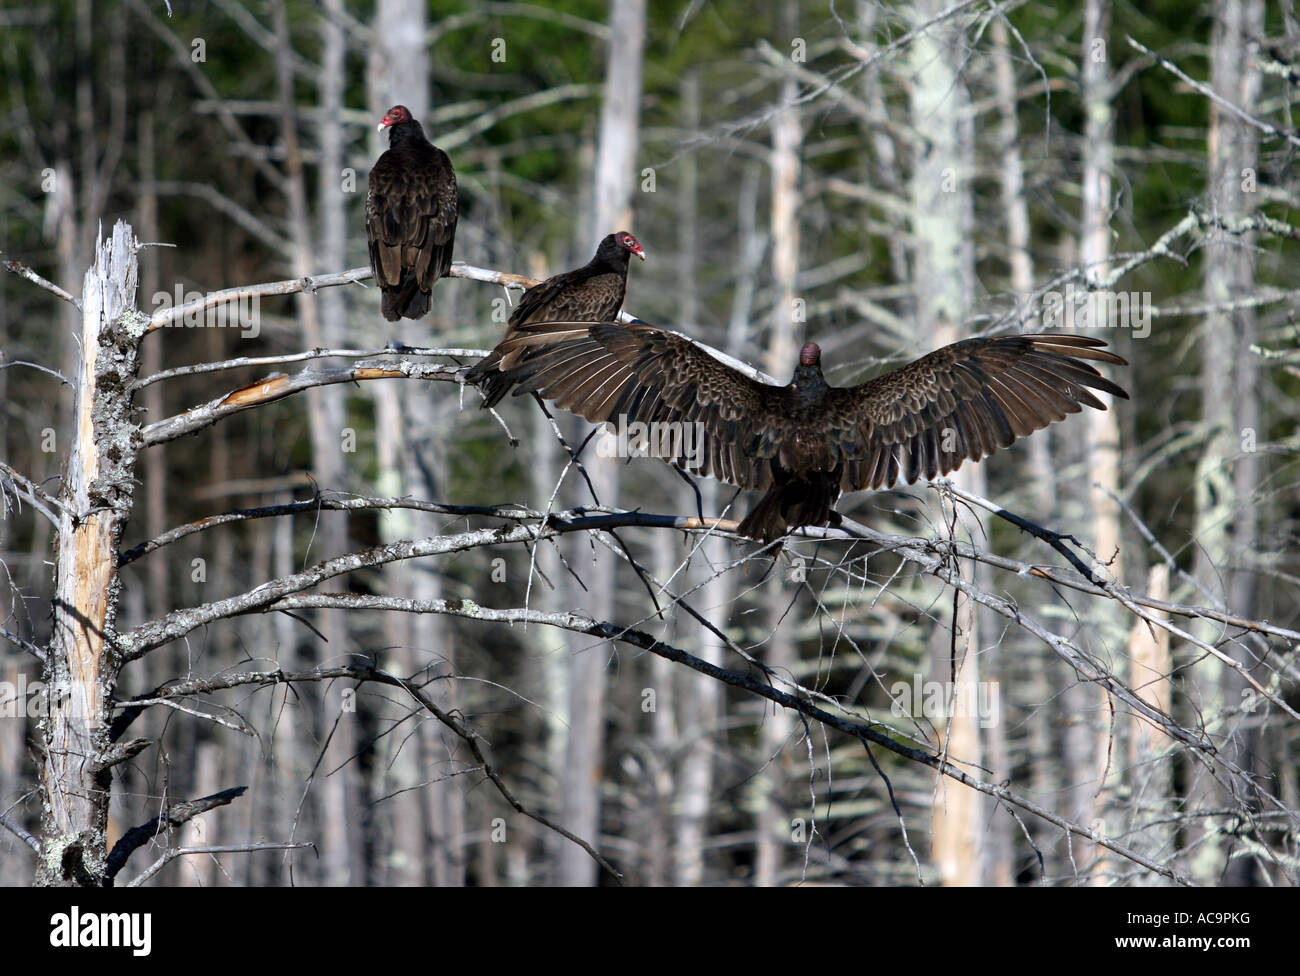 Turkey vultures roosting in some dead trees. Stock Photo